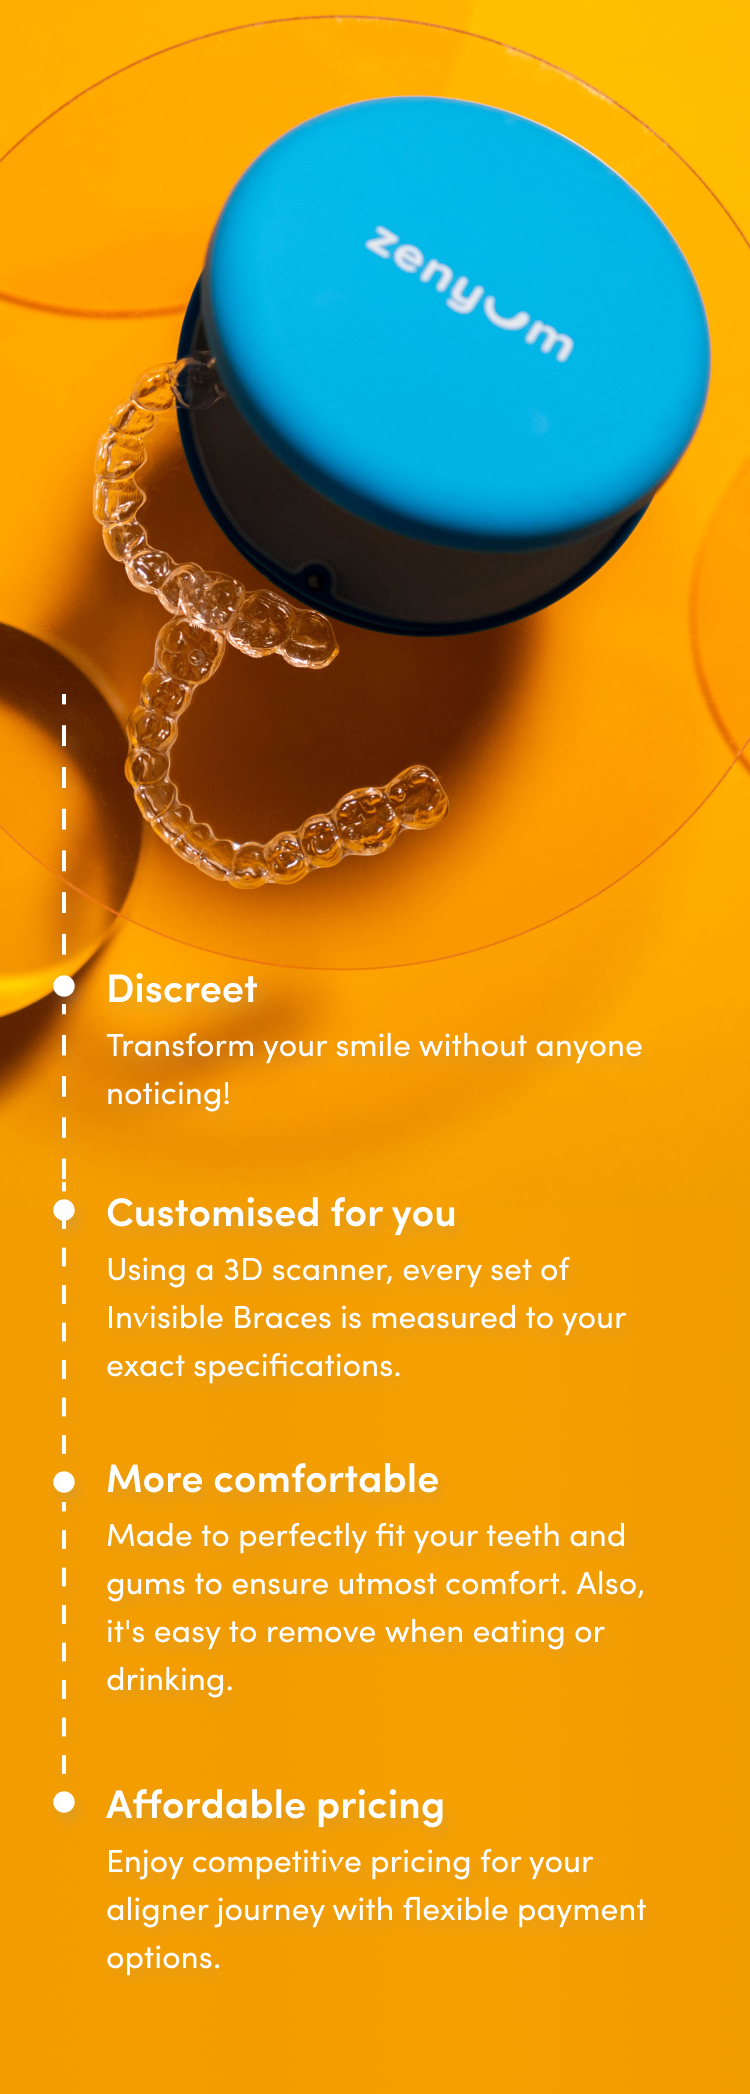 Blue Zenyum case with invisible braces and their benefits for teeth alignment